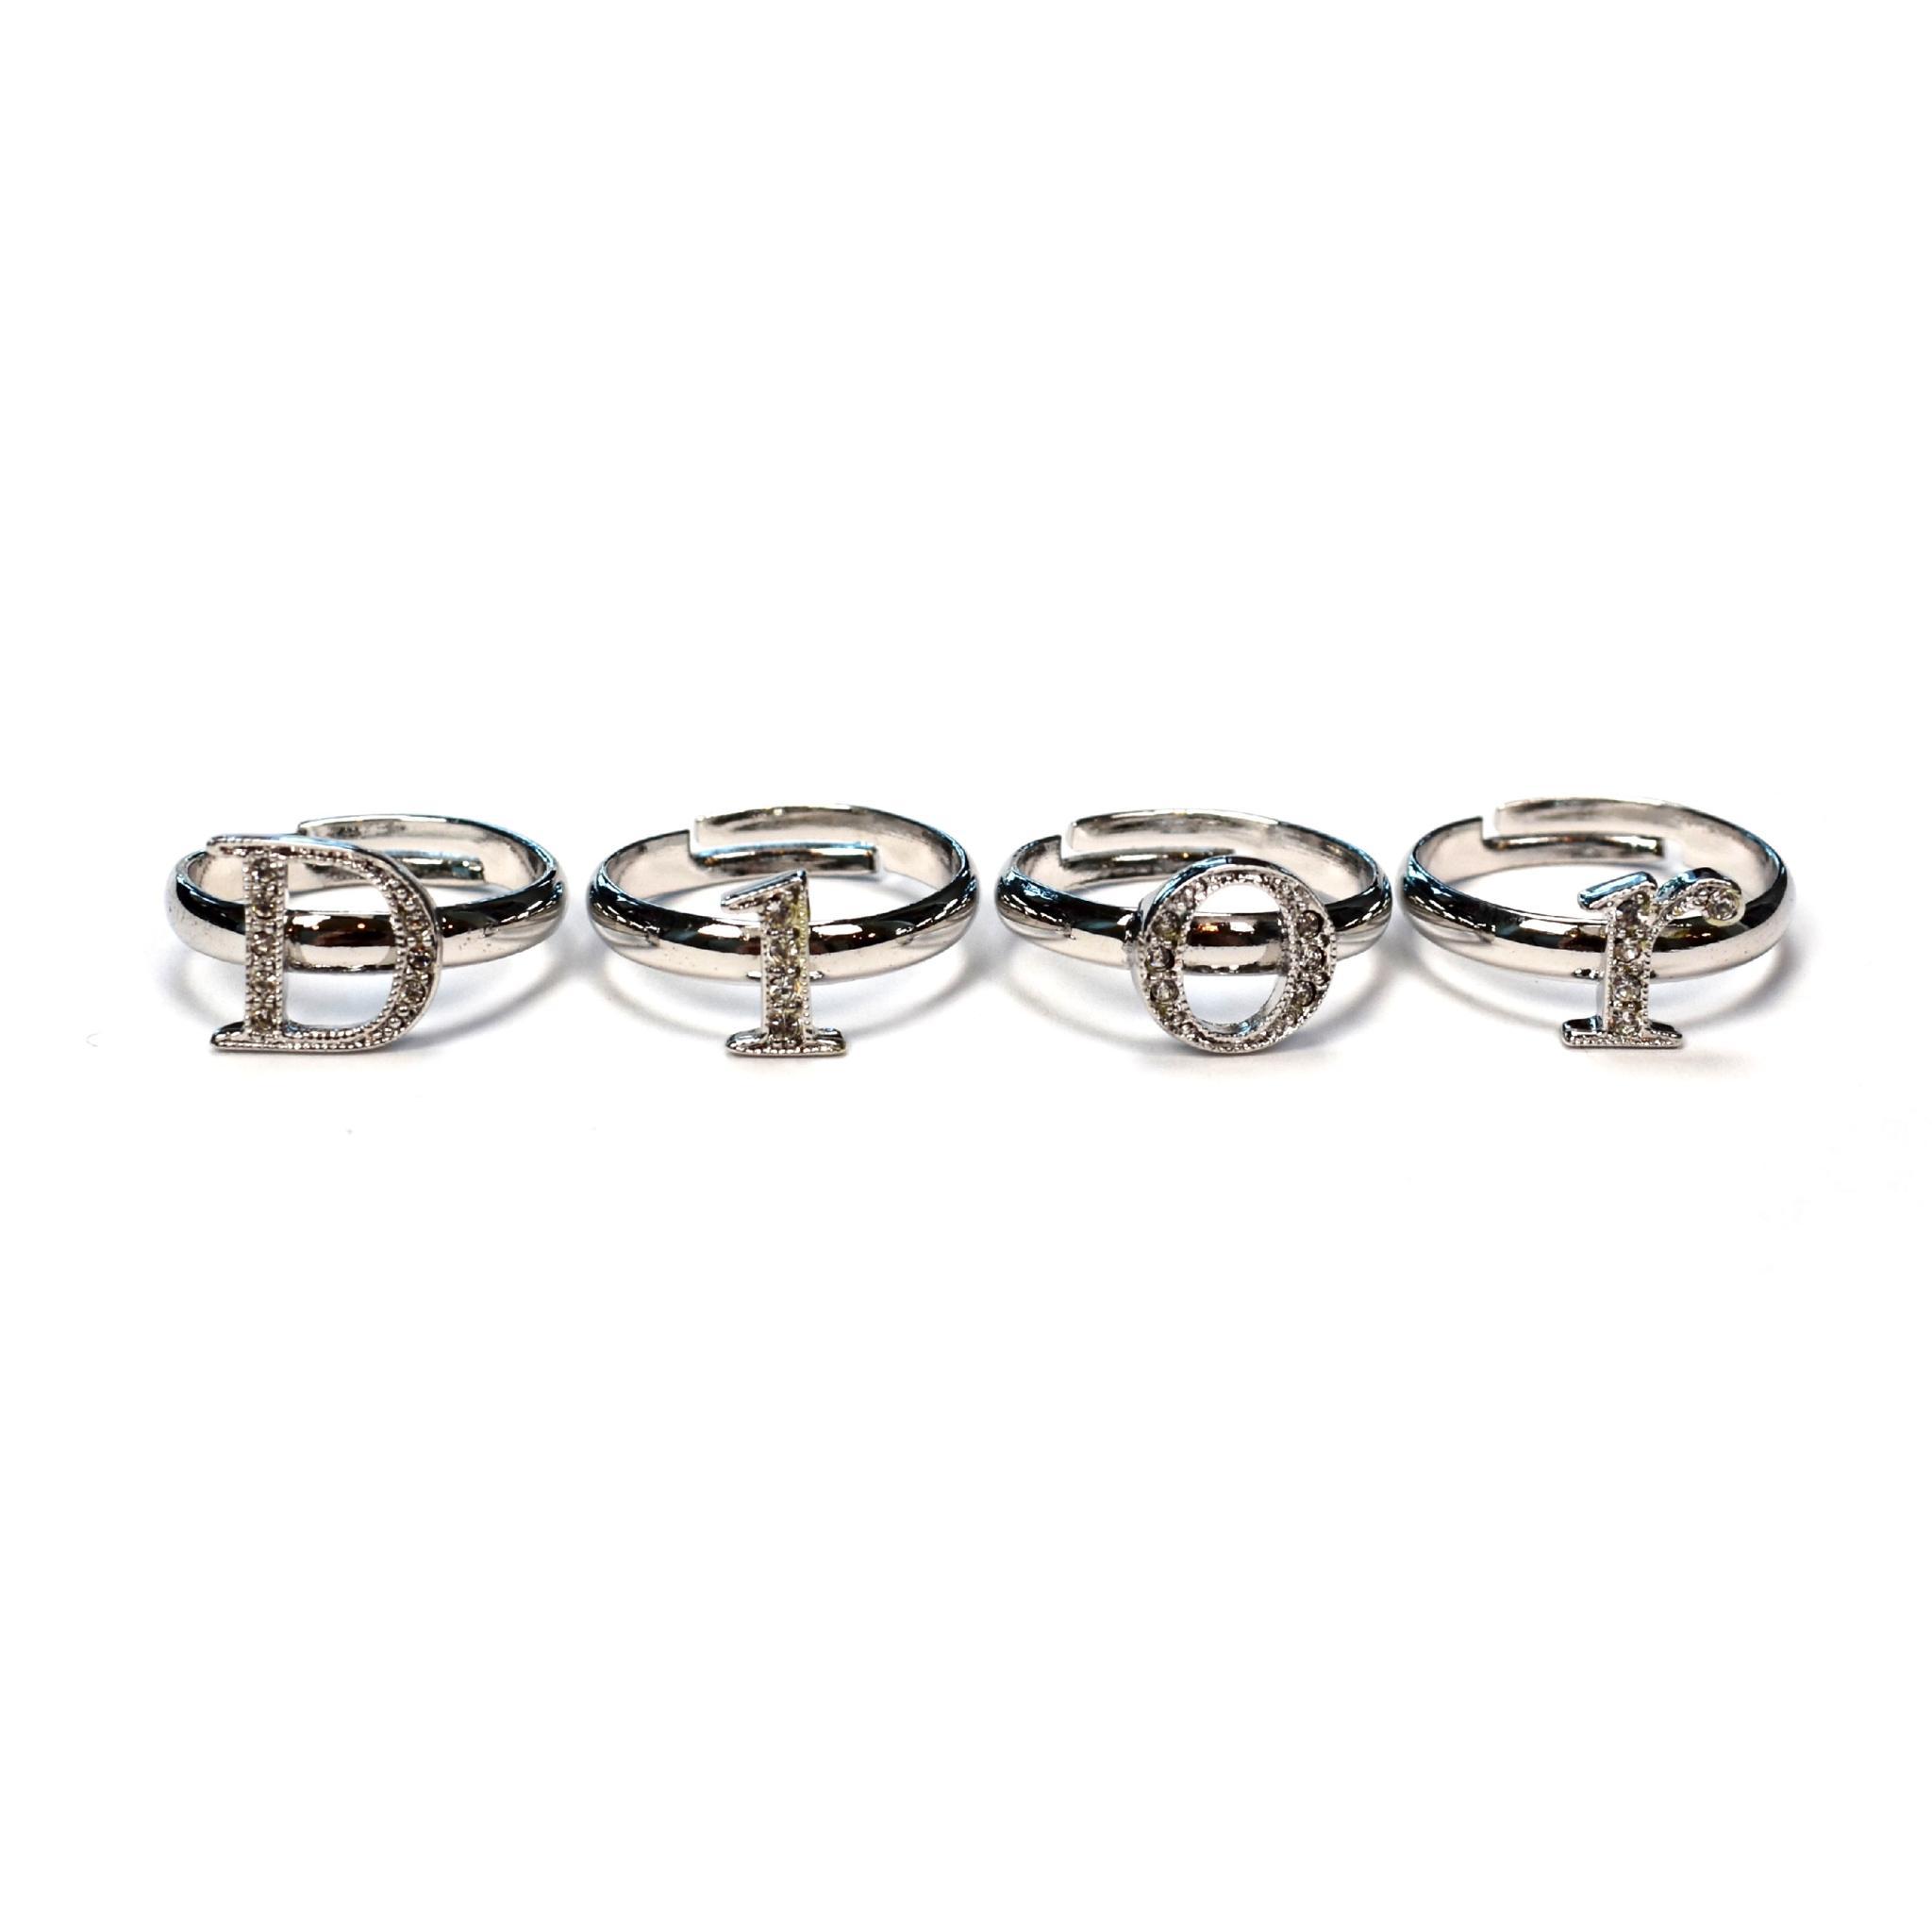 4 Rings Logo - Christian Dior Boutique of 4 Crystal Inset Spell Out Logo